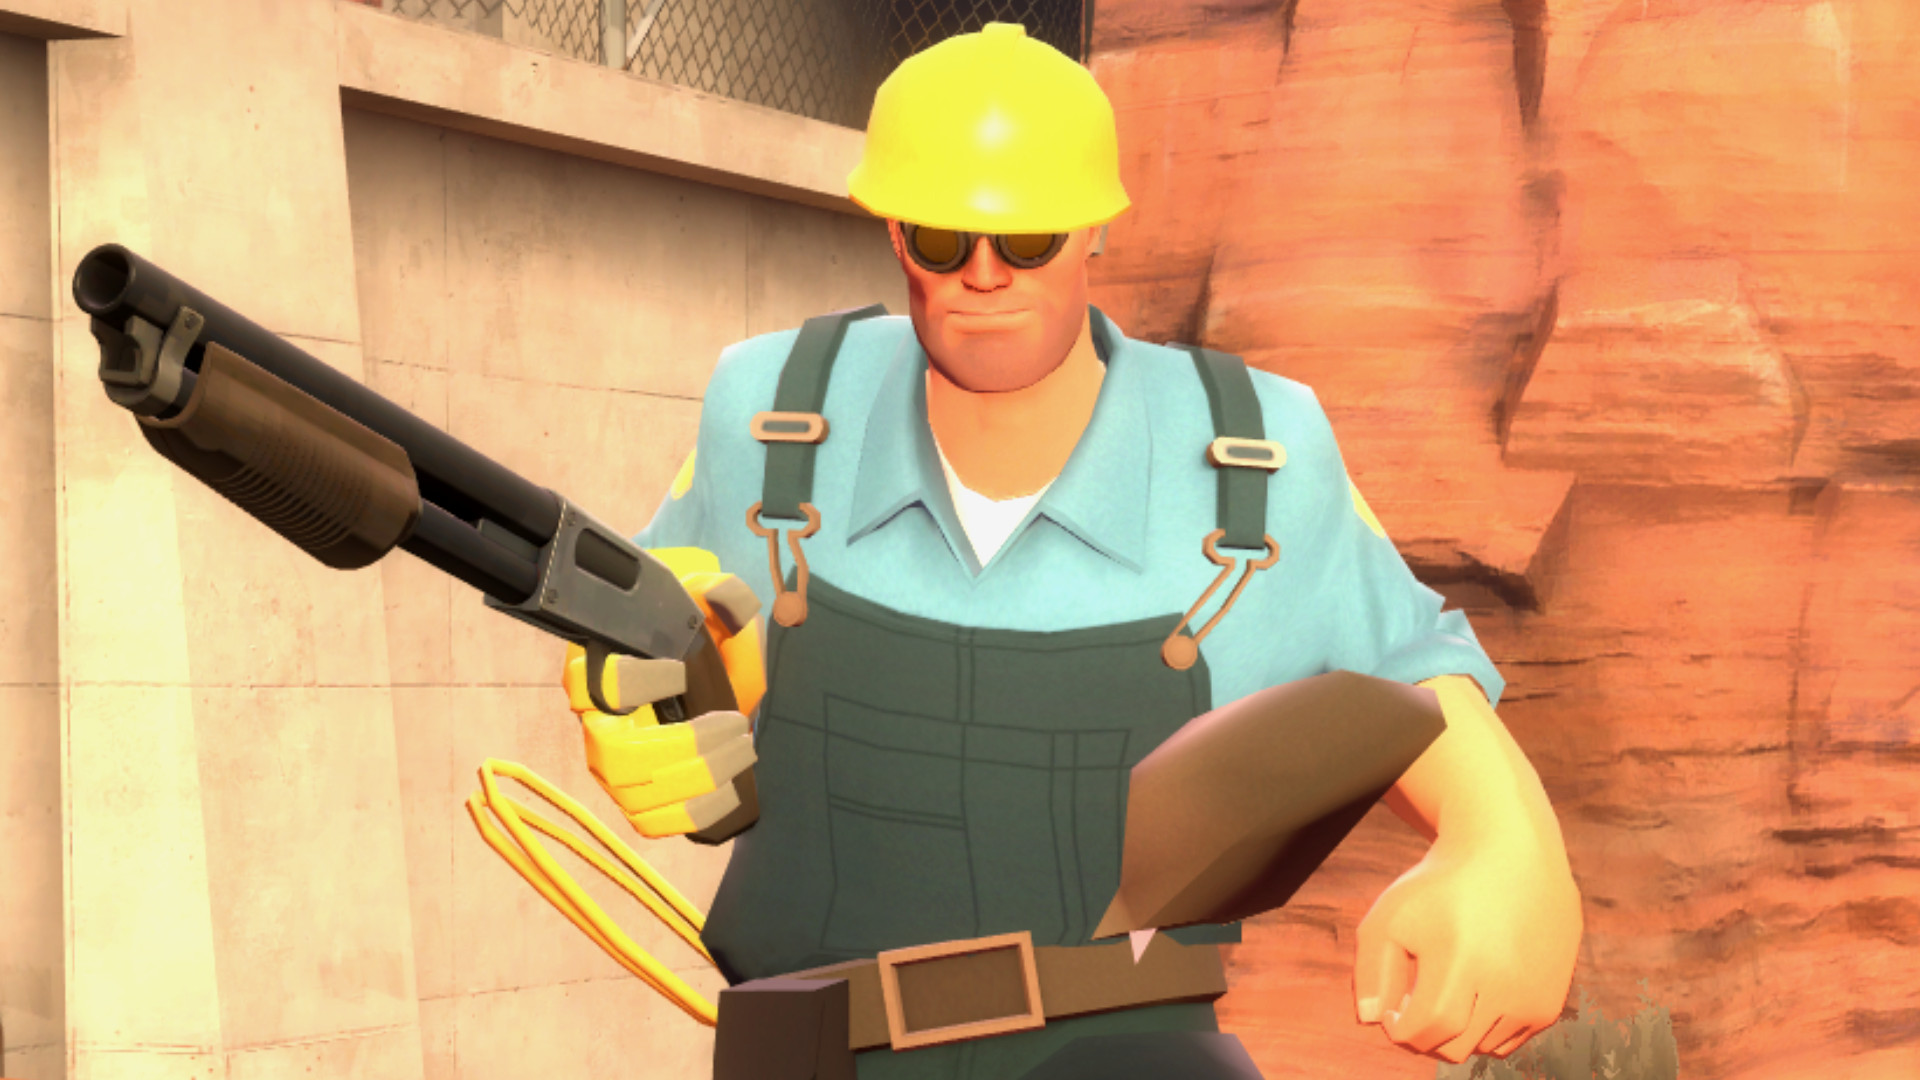 Team Fortress 2 mods return following silence from Valve